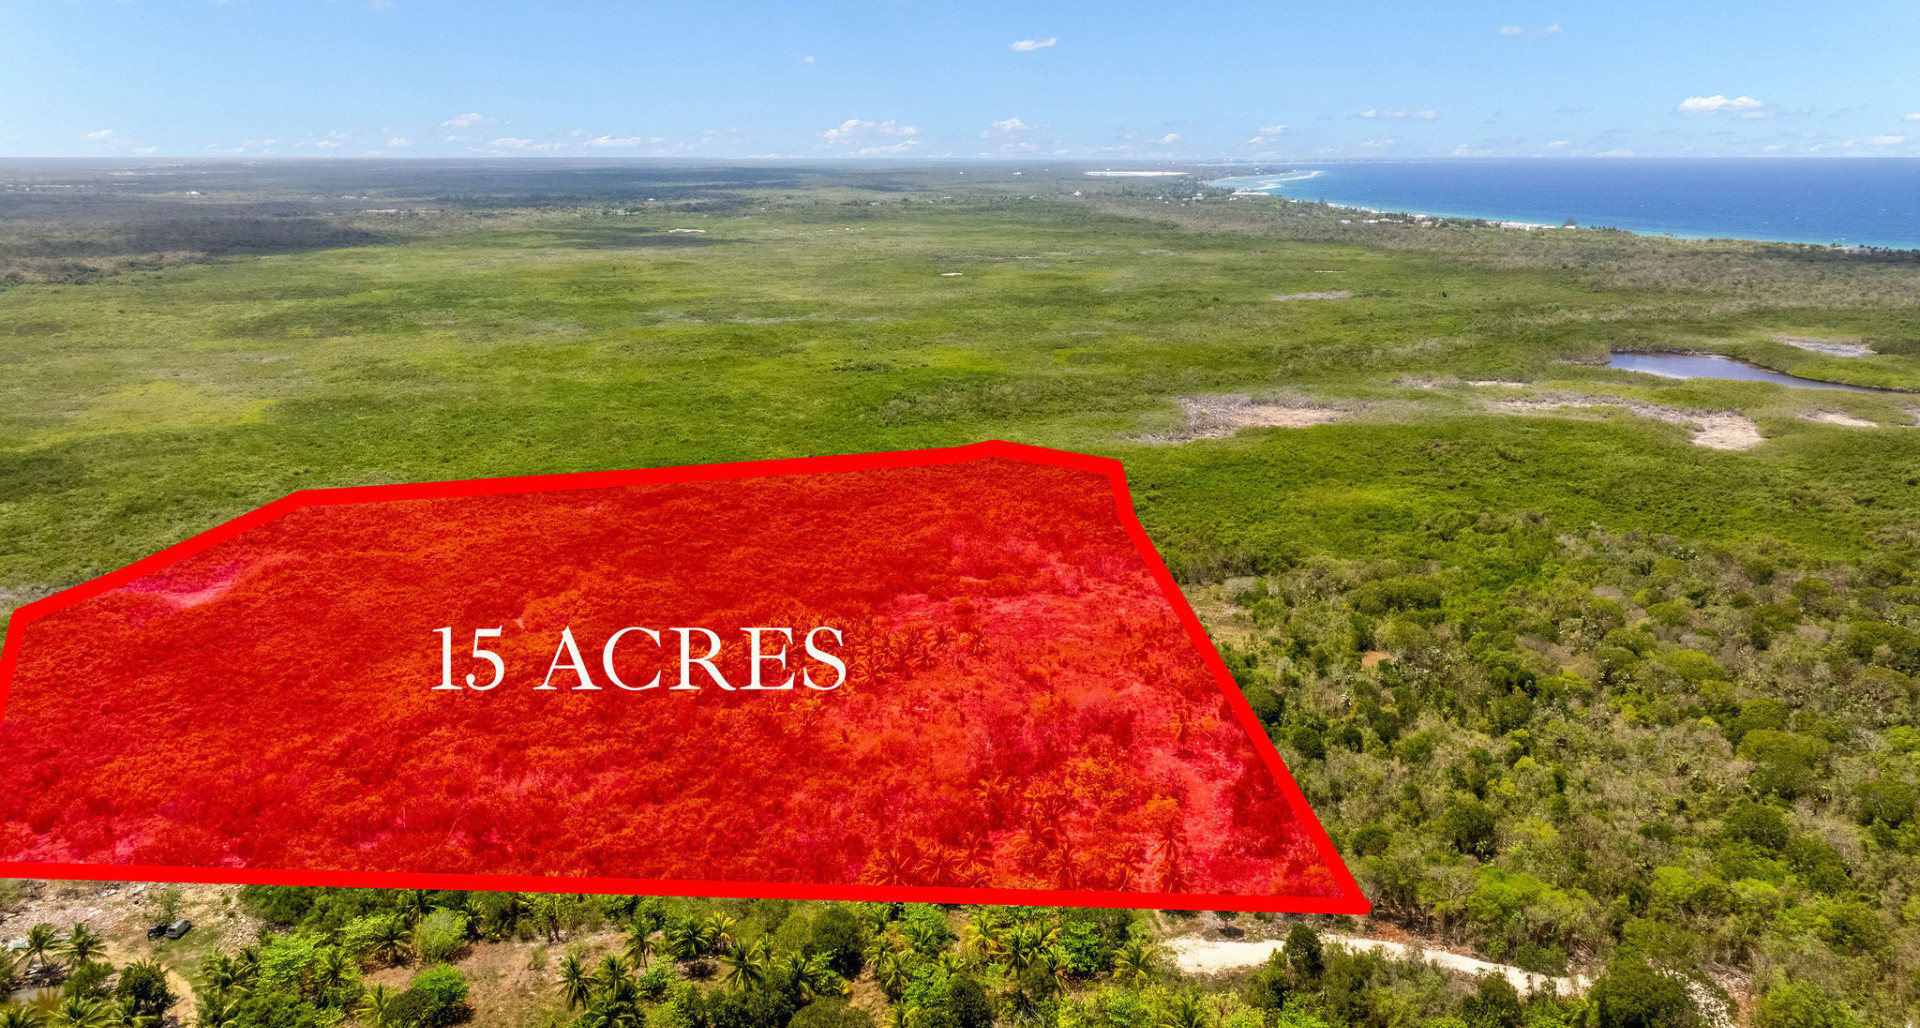 15 Acres Agricultural/Low Density Land with Road Access image 1